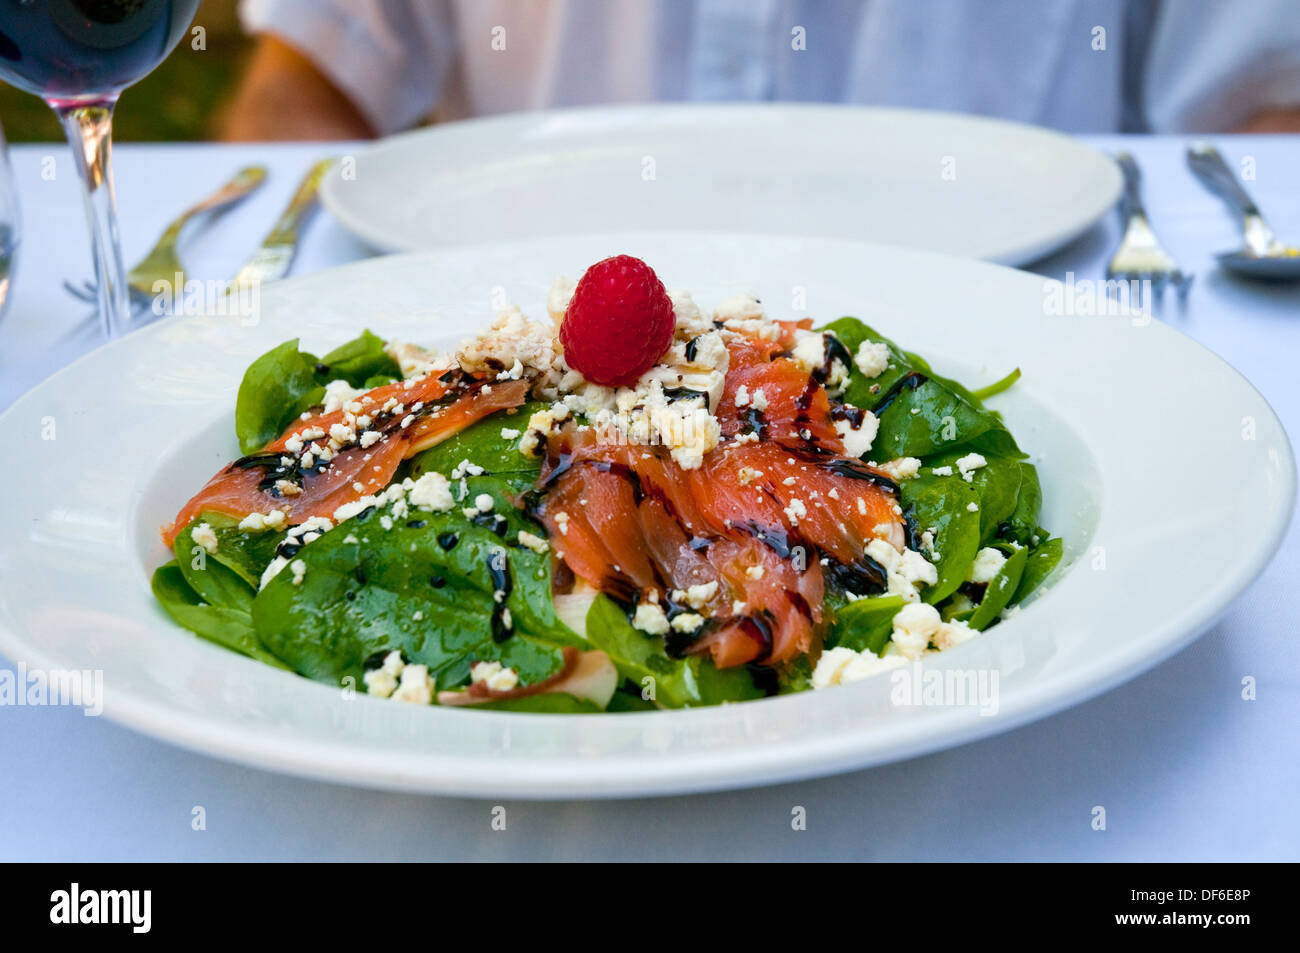 Salad made of lettuce, smoked salmon and cottage cheese. Stock Photo